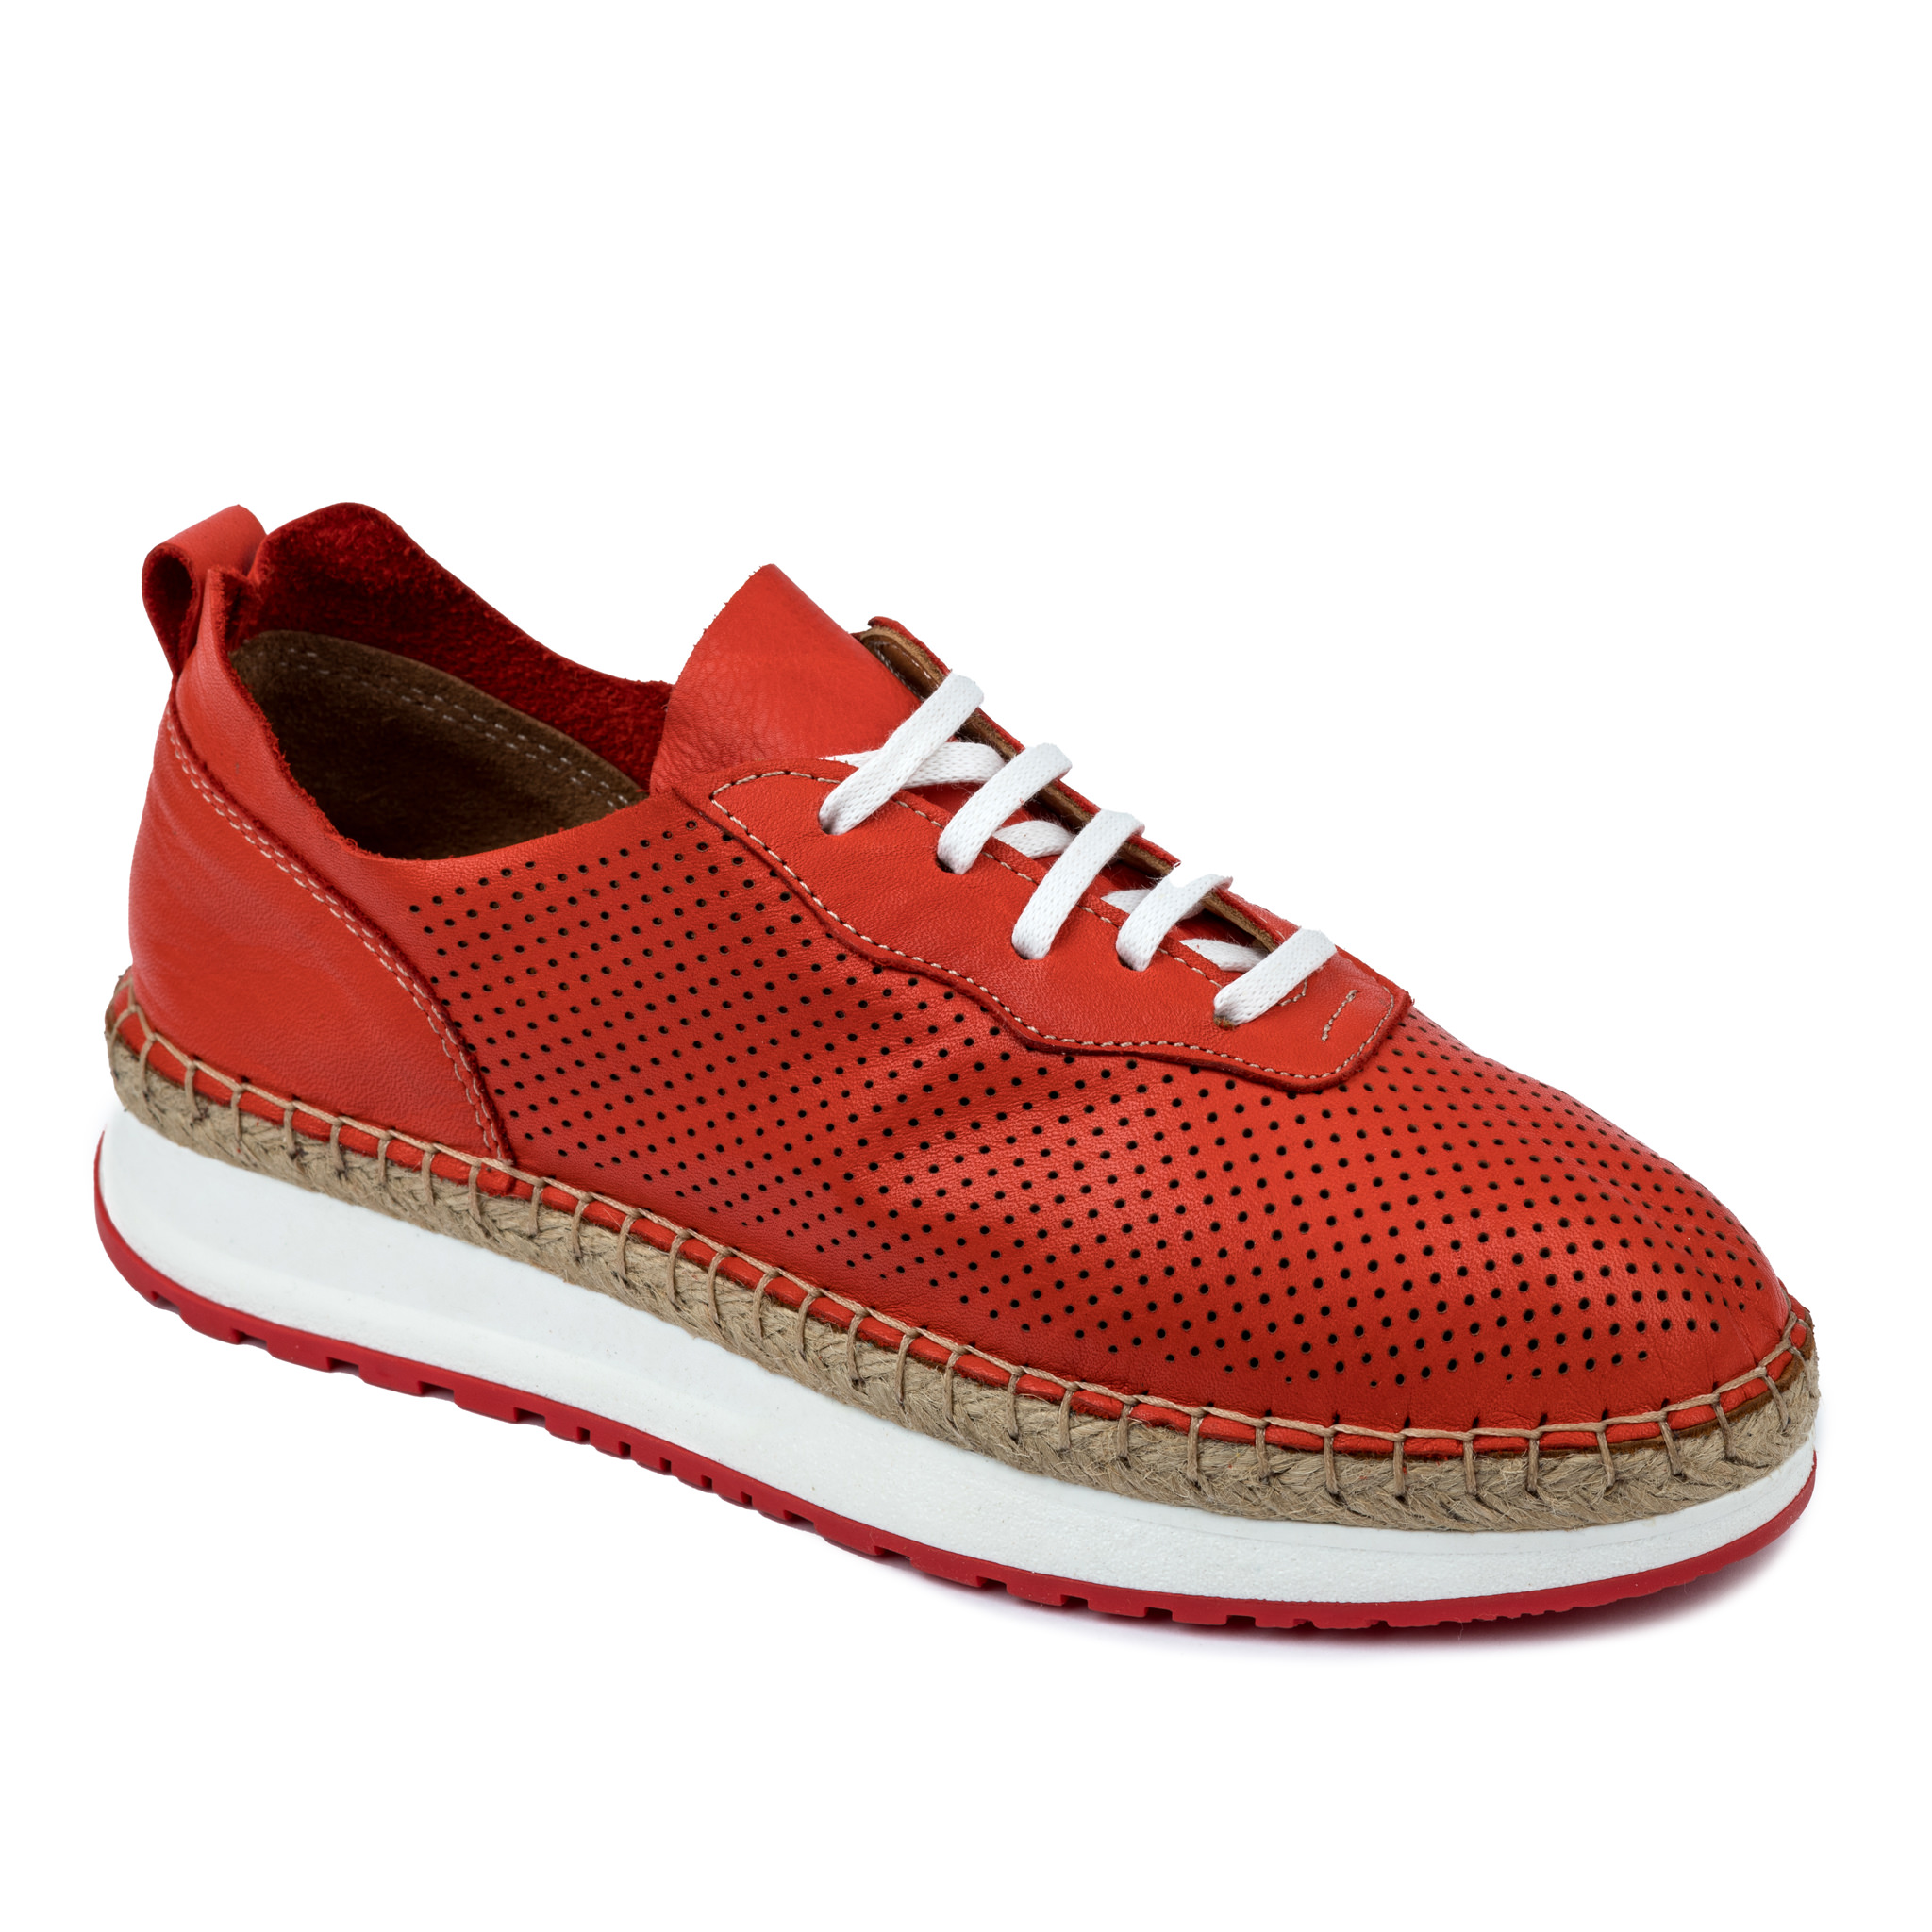 Leather sneakers A548 - ORANGE